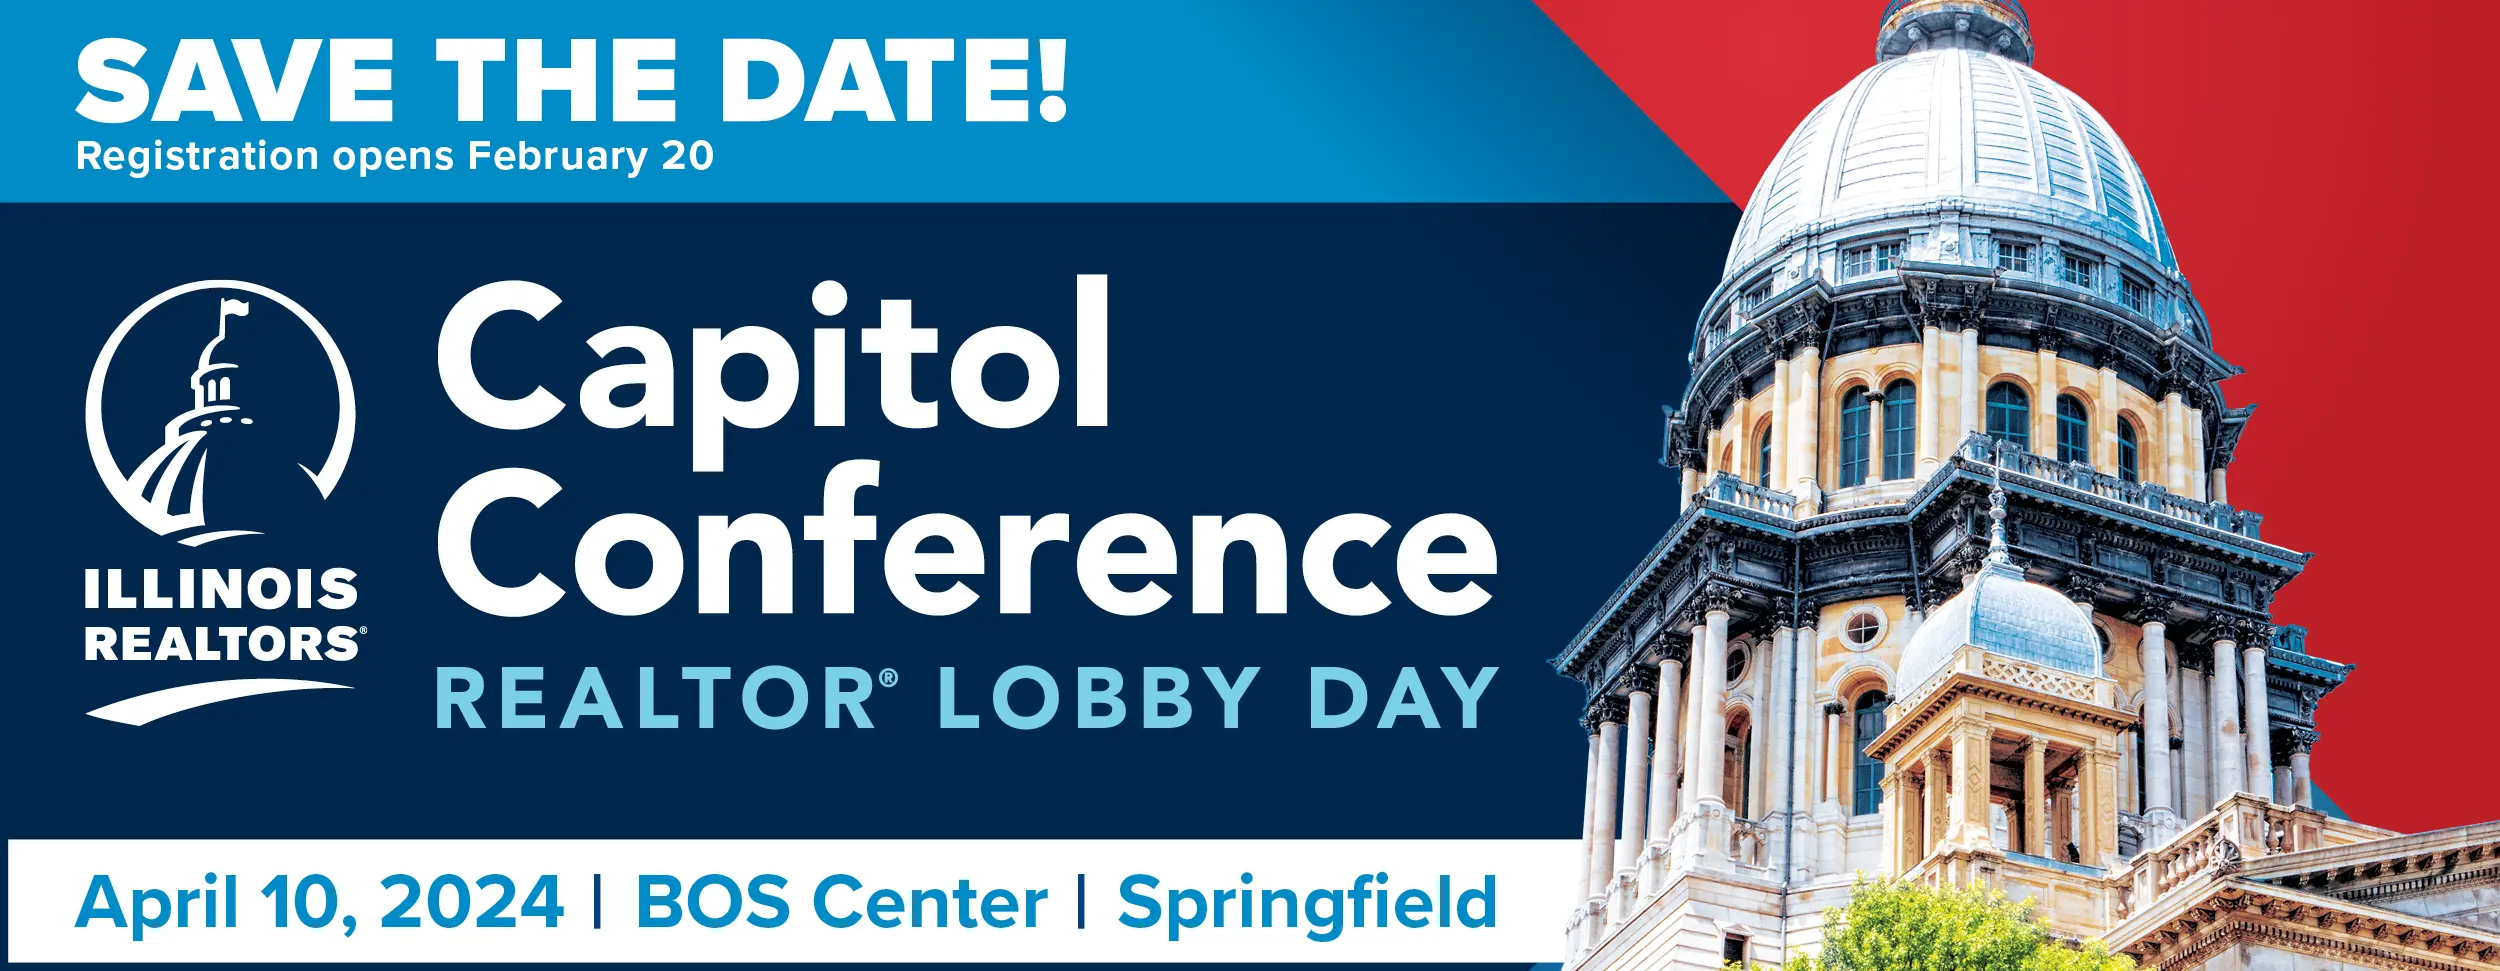 2024 Capitol Conference Realtor Lobby Day - April 10, 2024